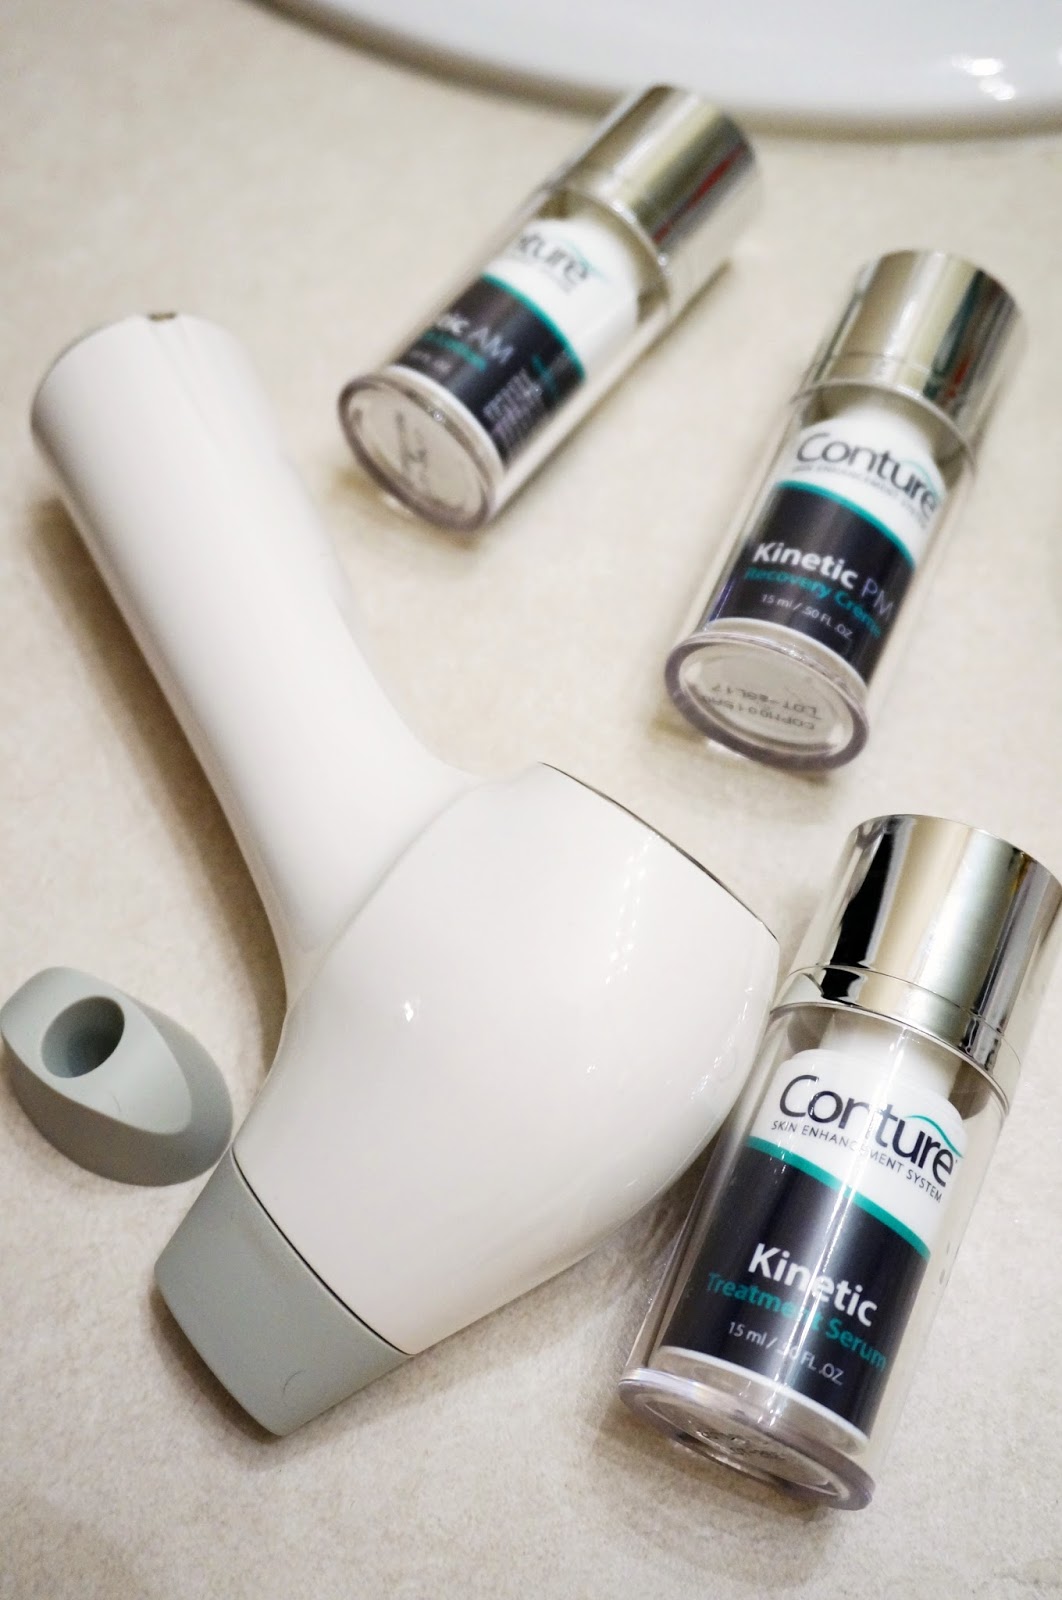 Conture Review - Conture Kinetic Skin Toning System: One Month Results by popular North Carolina beauty blogger Rebecca Lately